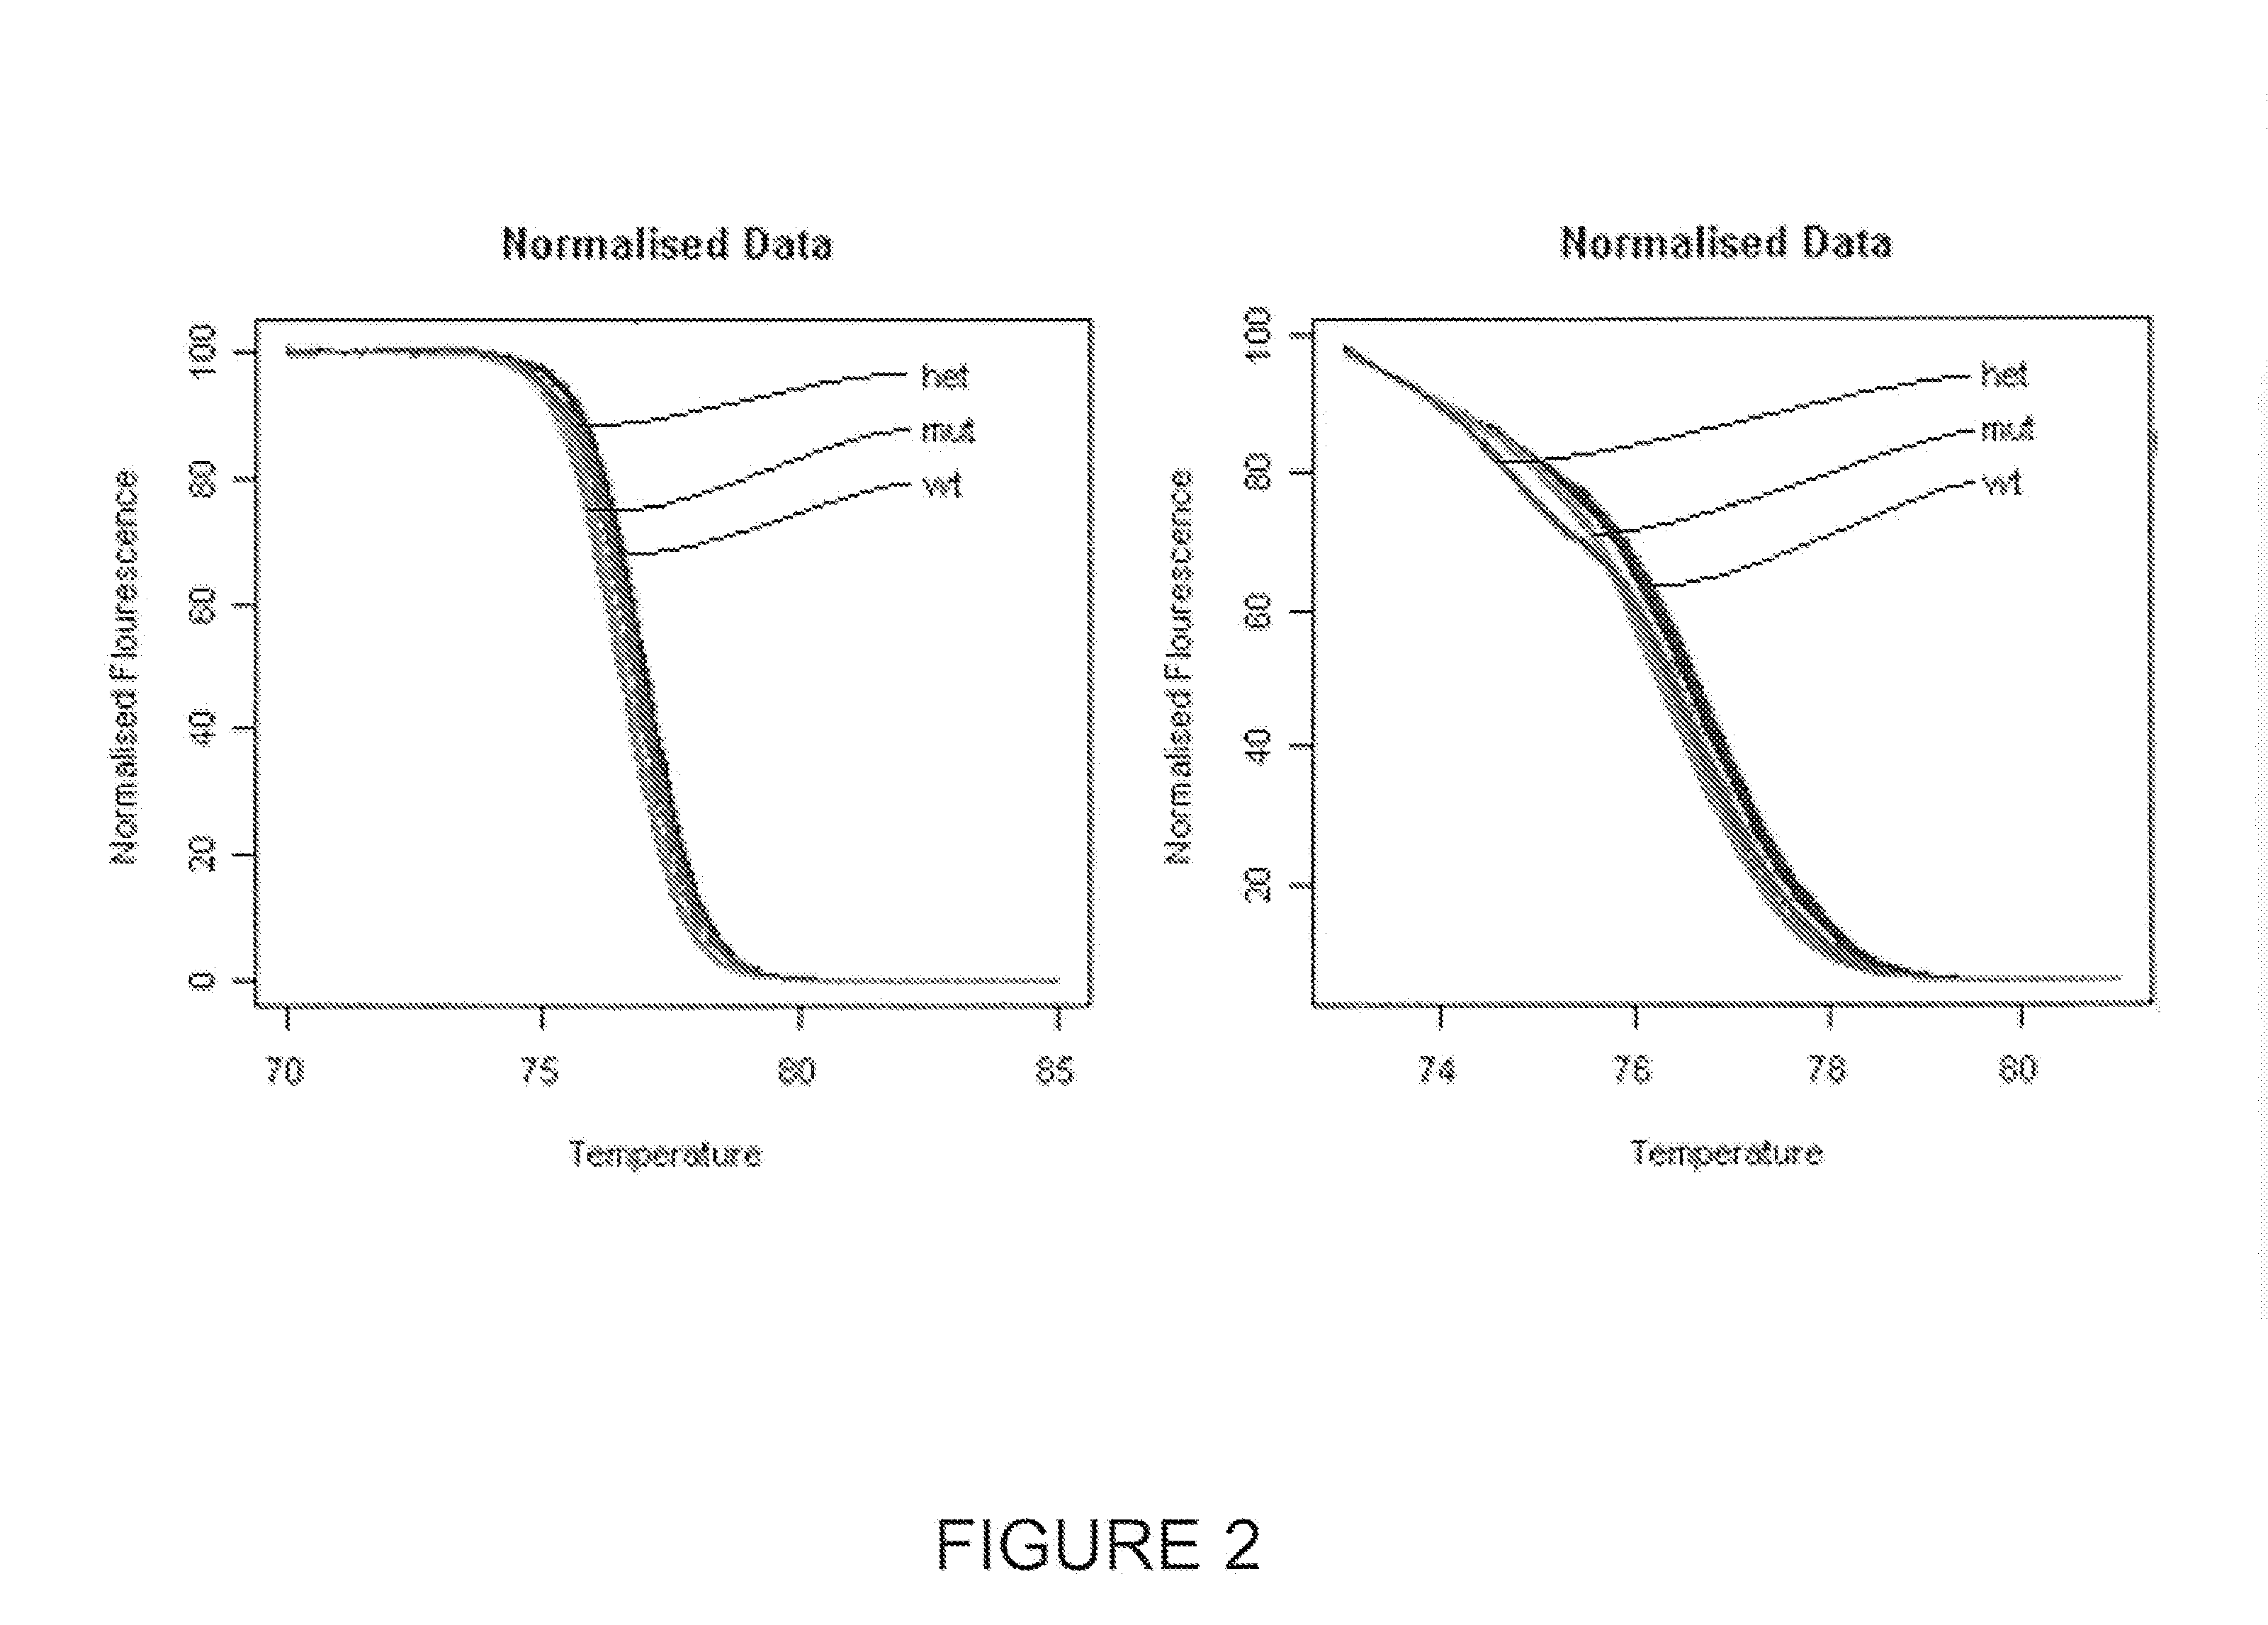 Method and system for analysis of melt curves, particularly dsDNA and protein melt curves